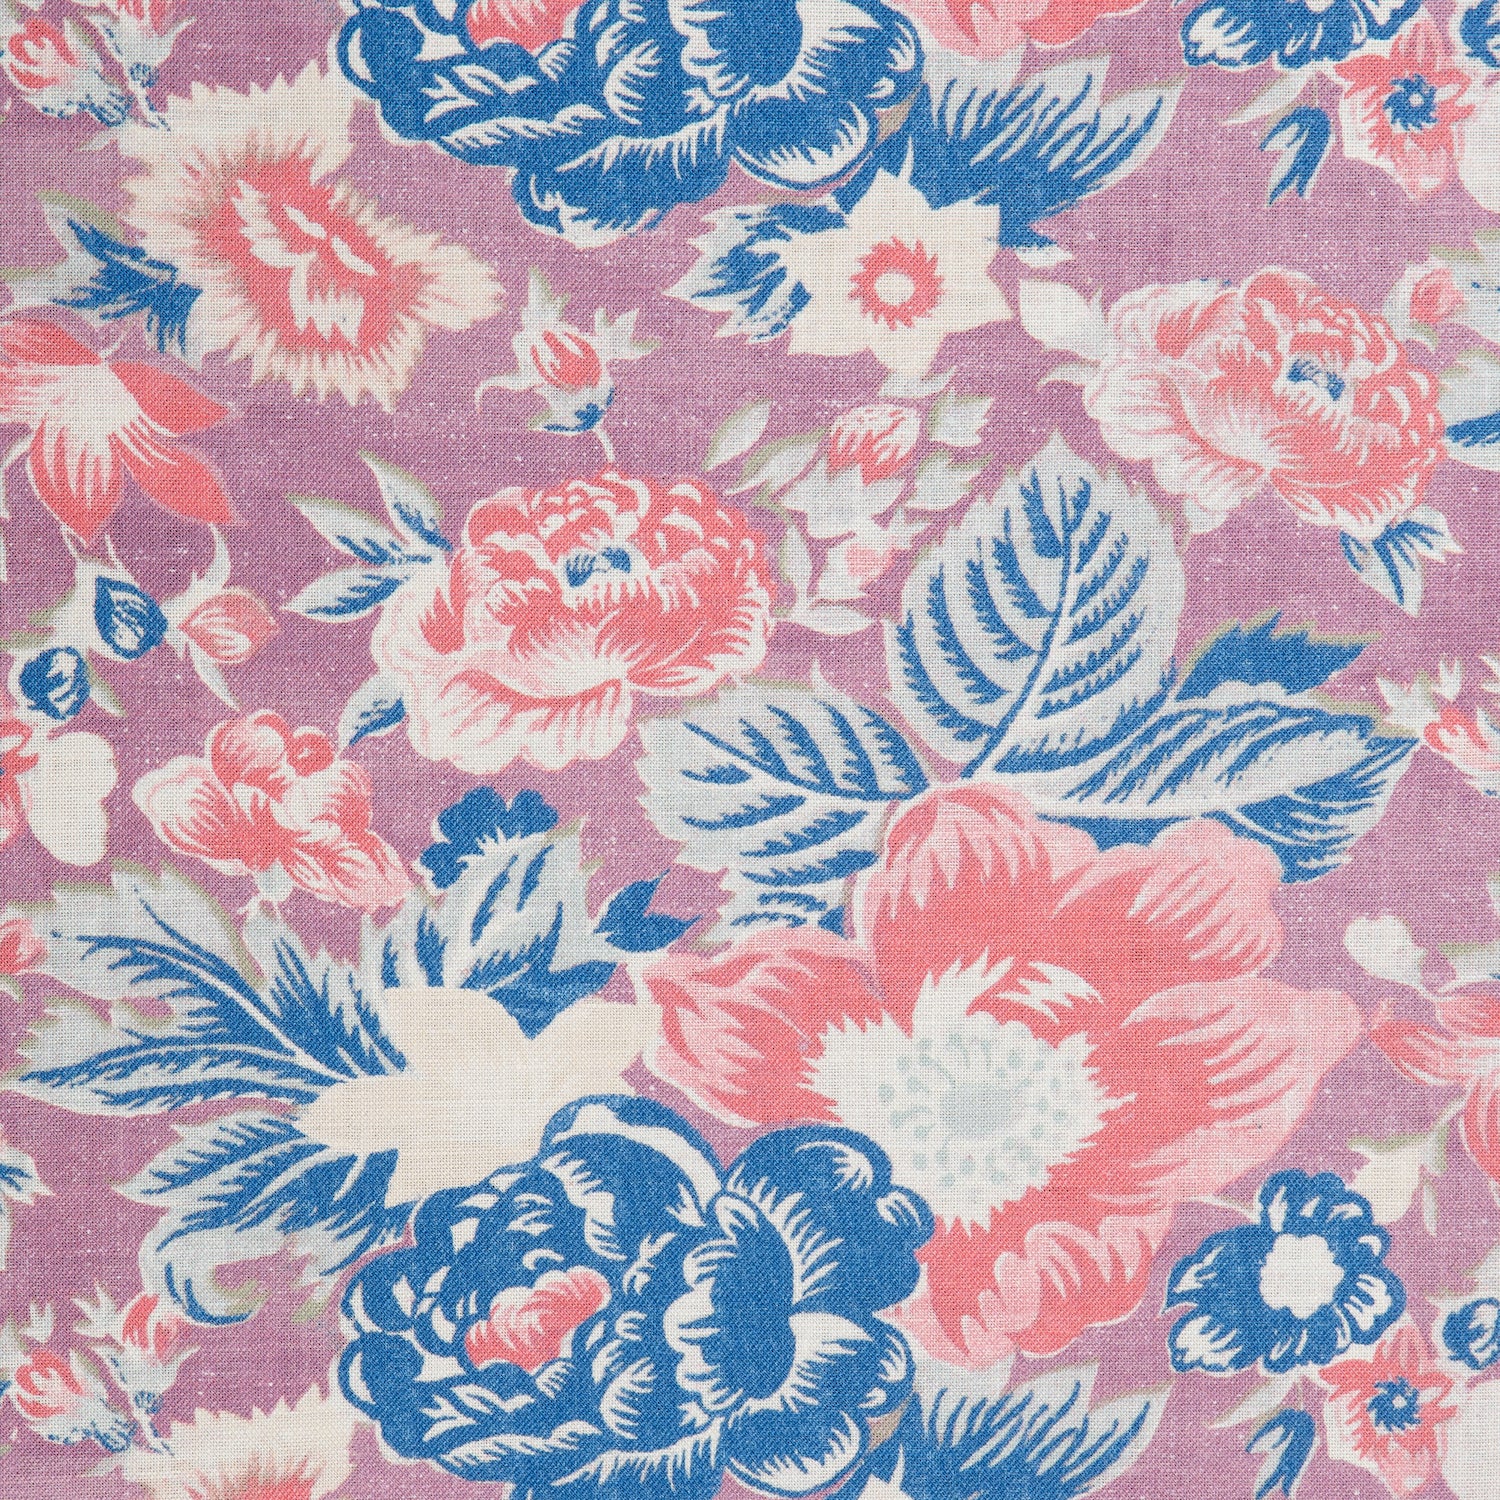 Detail of a linen fabric in a detailed floral pattern in cream, blue and pink on a purple field.